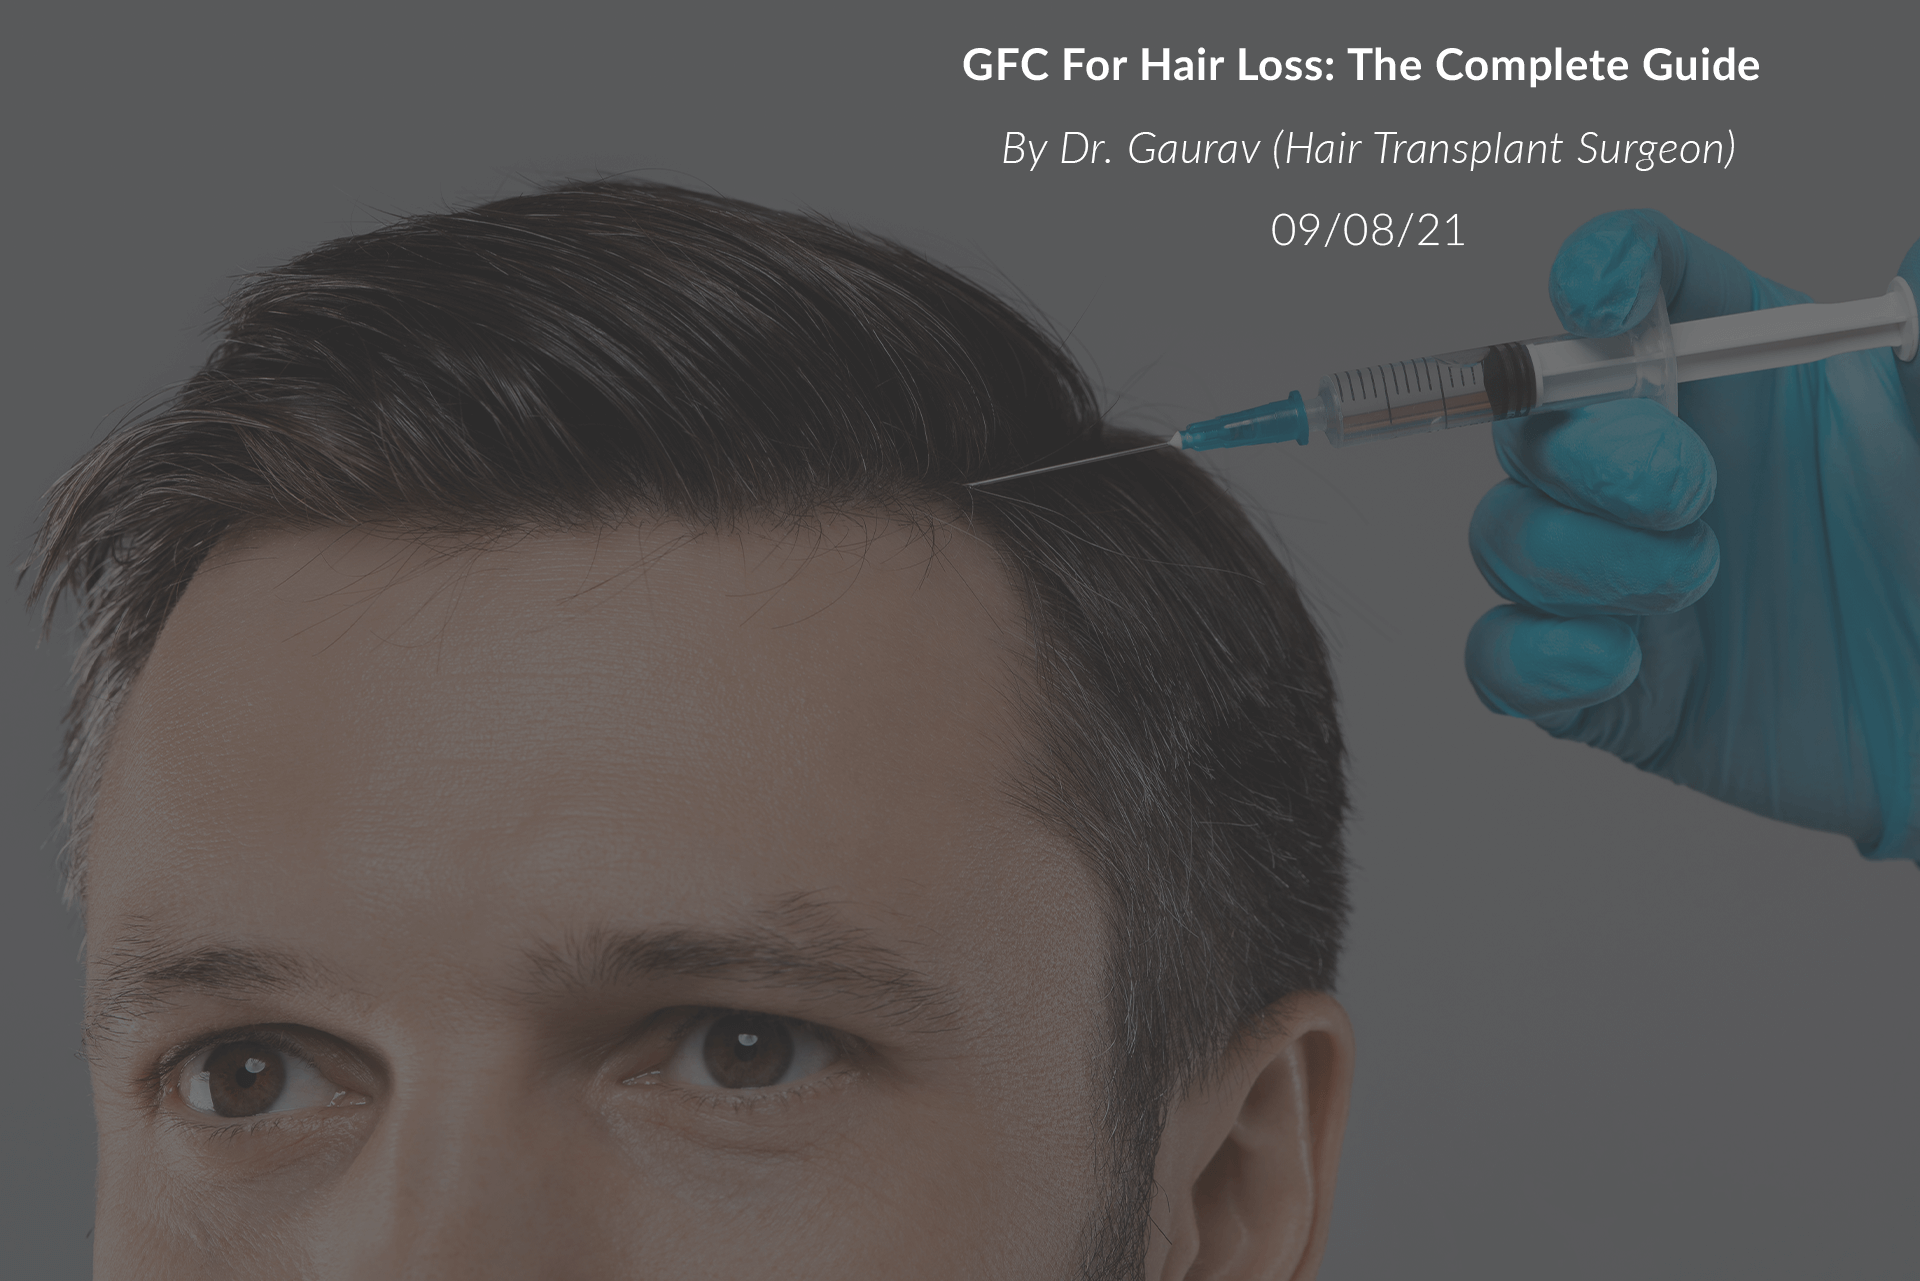 GFC for Hair Loss: The Complete Guide